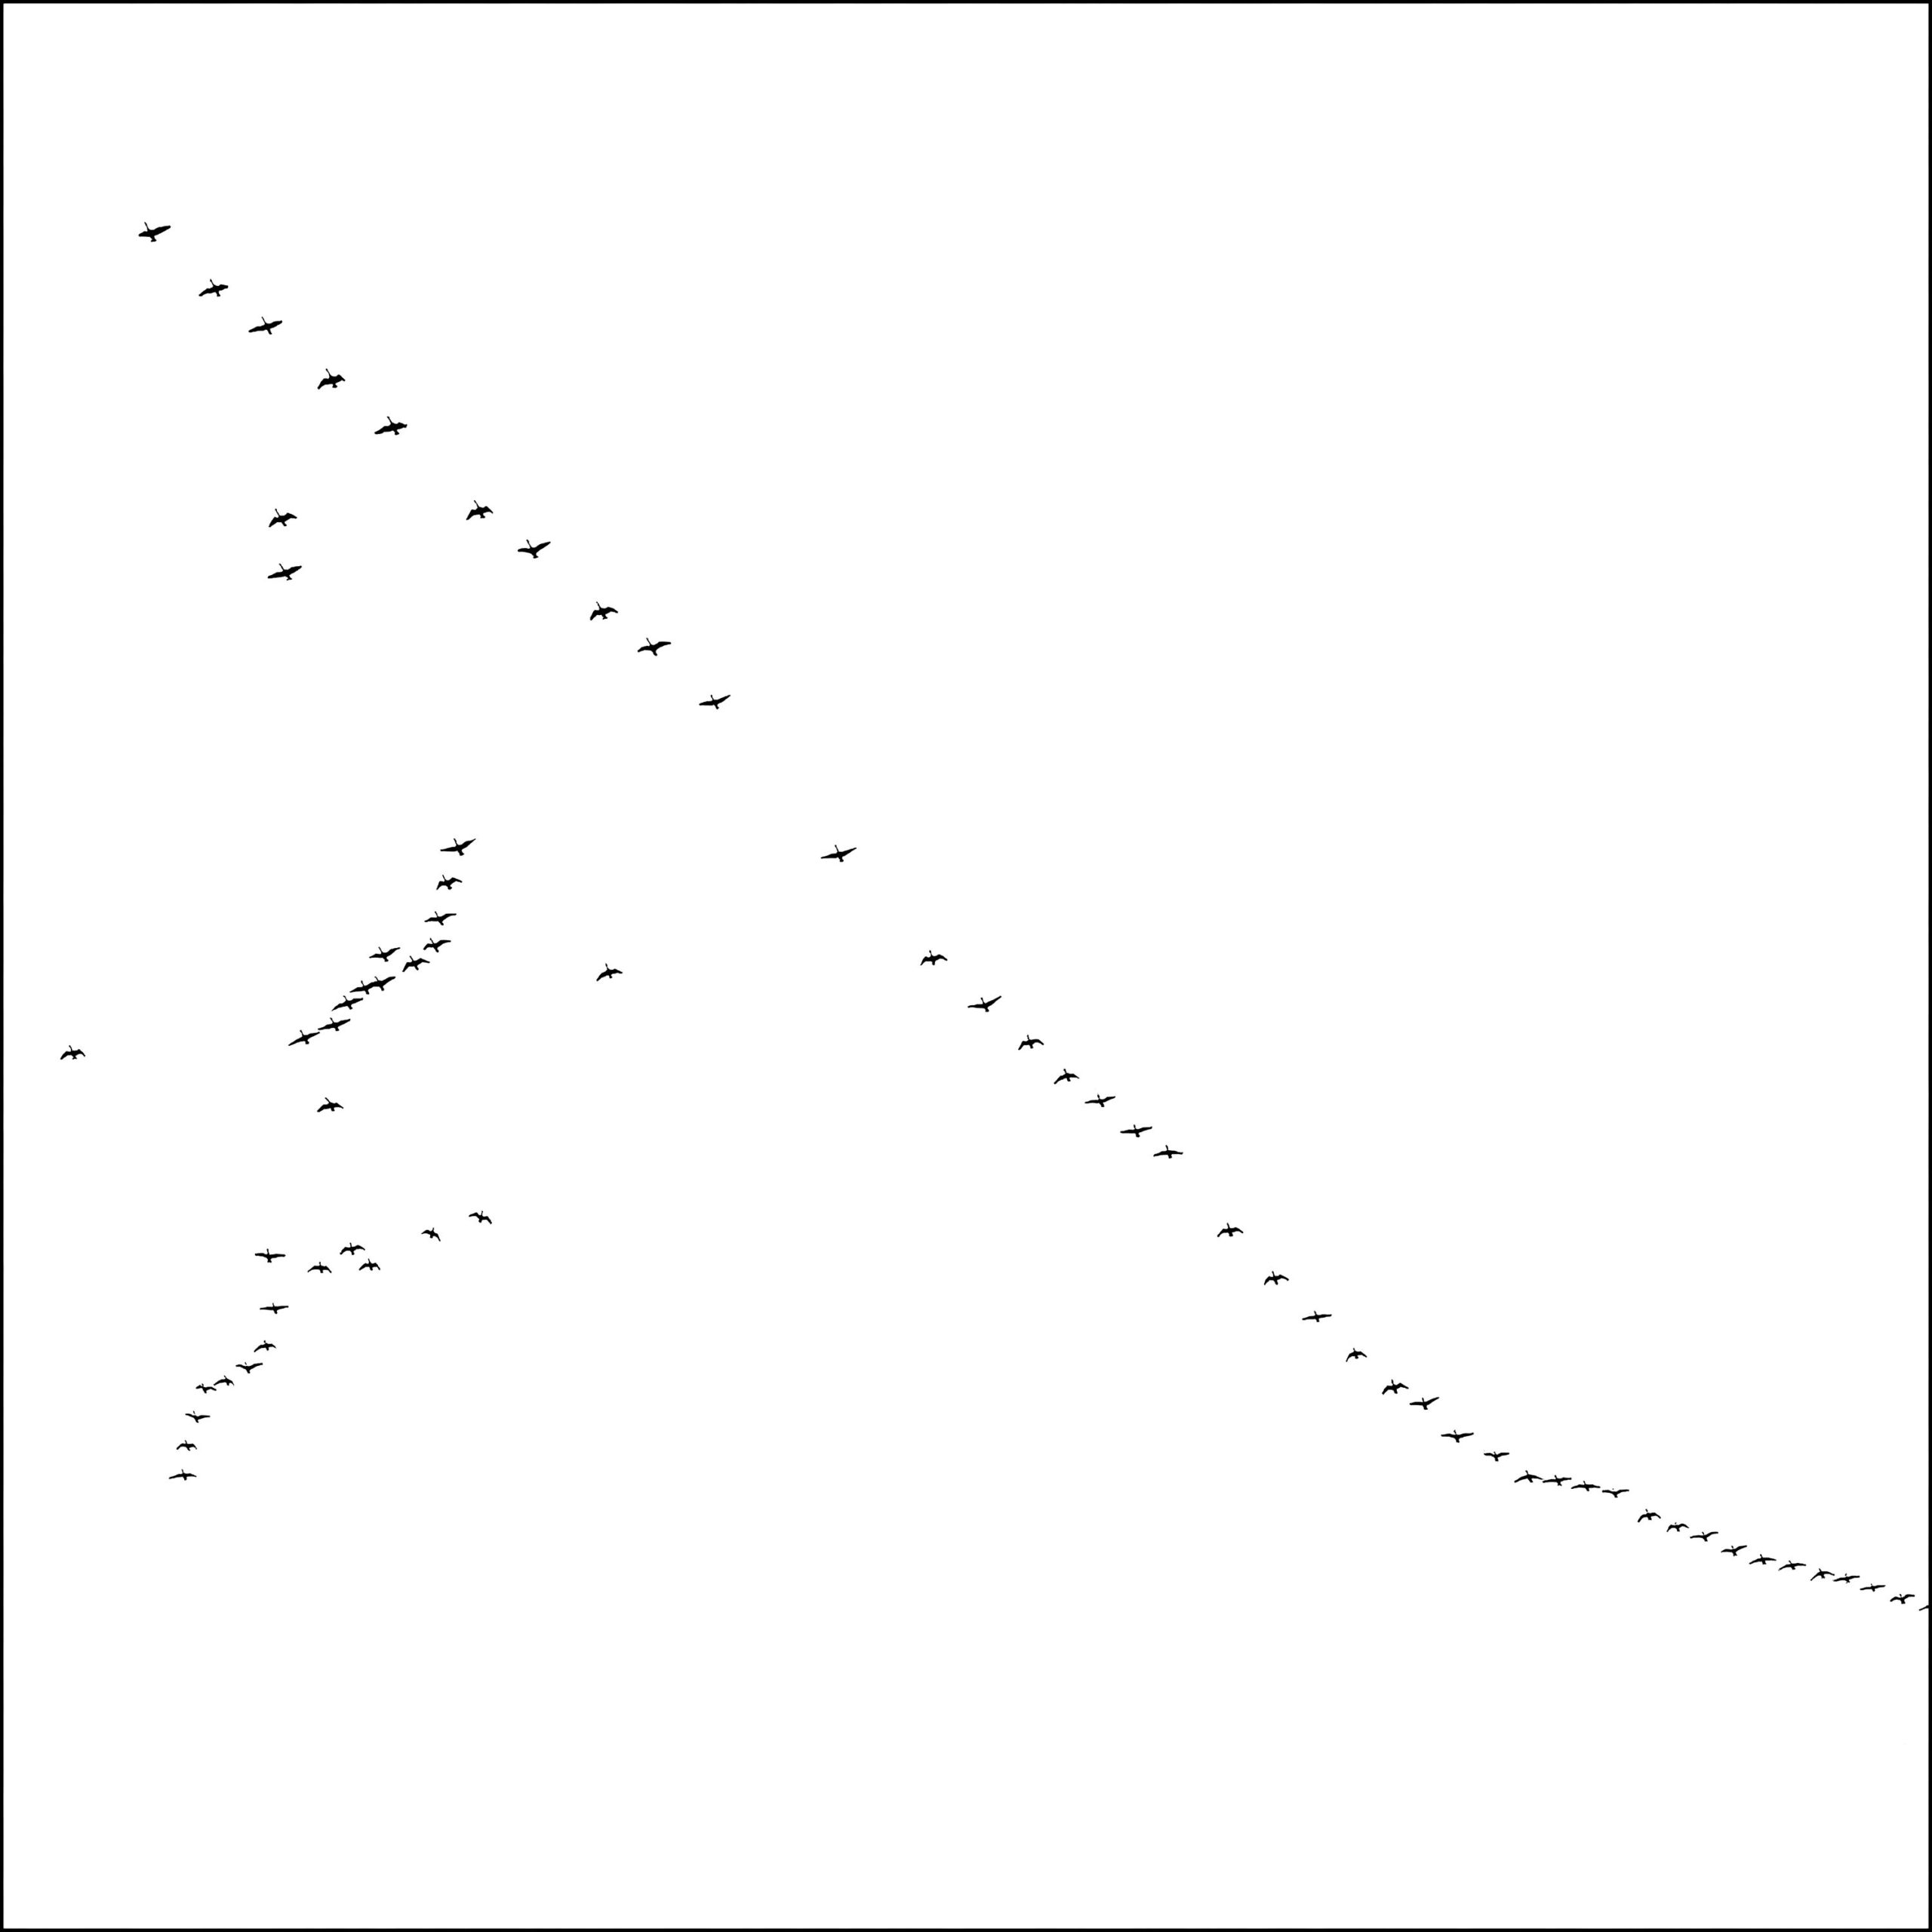 Birds by NIgel Parry from the Landscapes series, bird formation on front of white sky